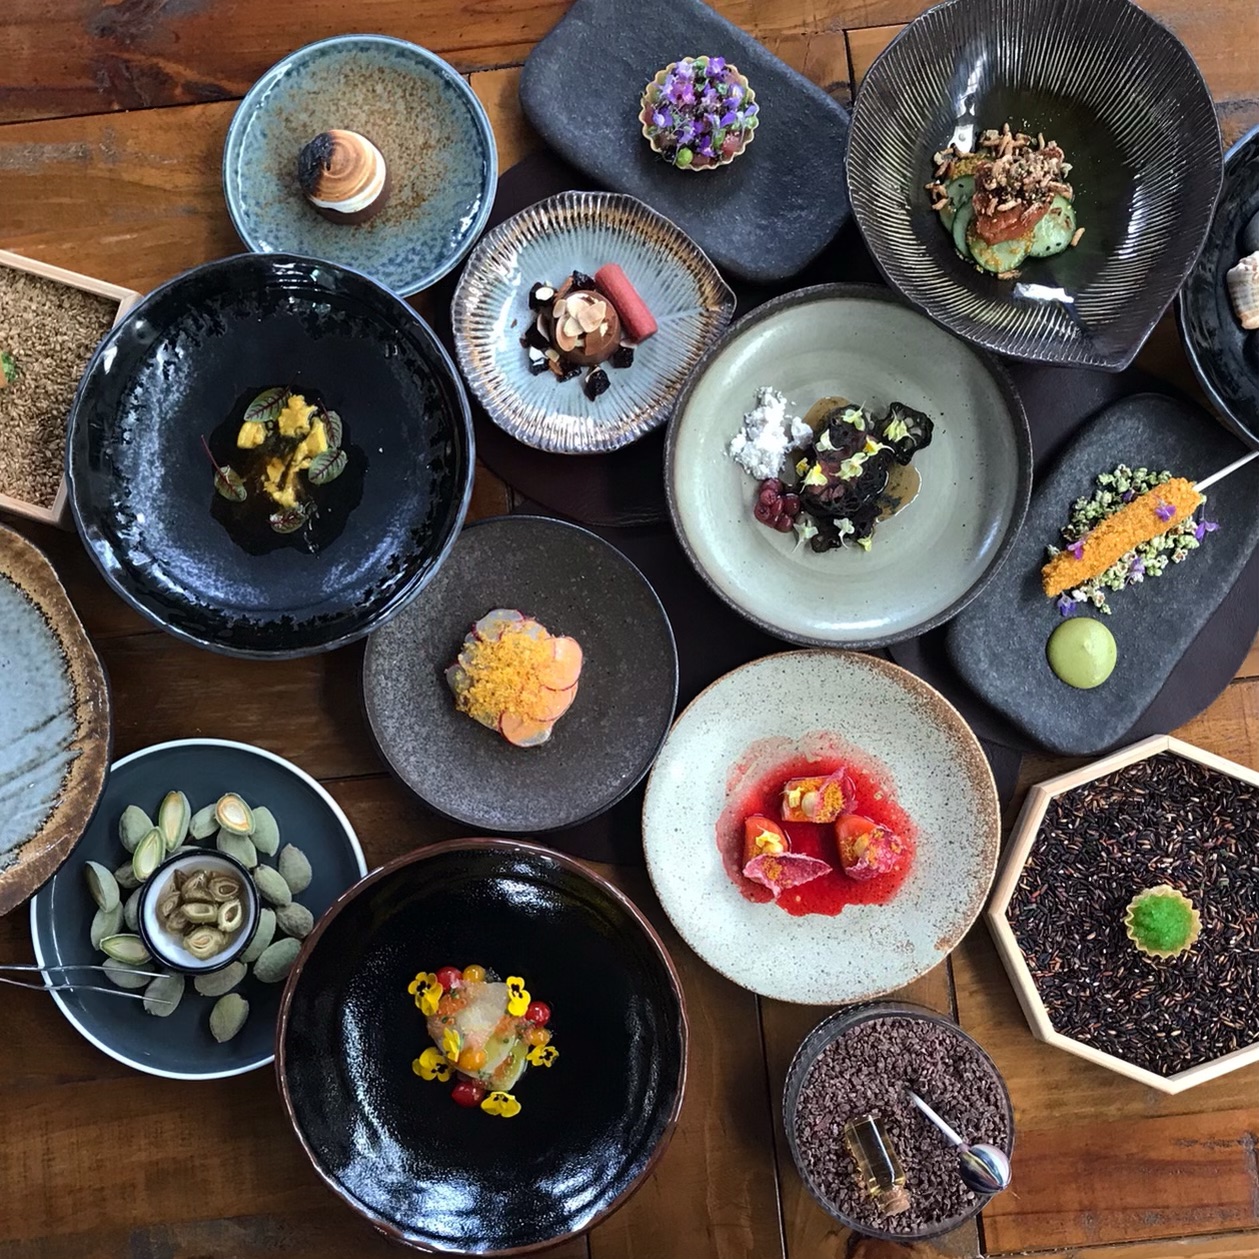 Two new Canberra restaurants make the cut in annual Chef Hat awards